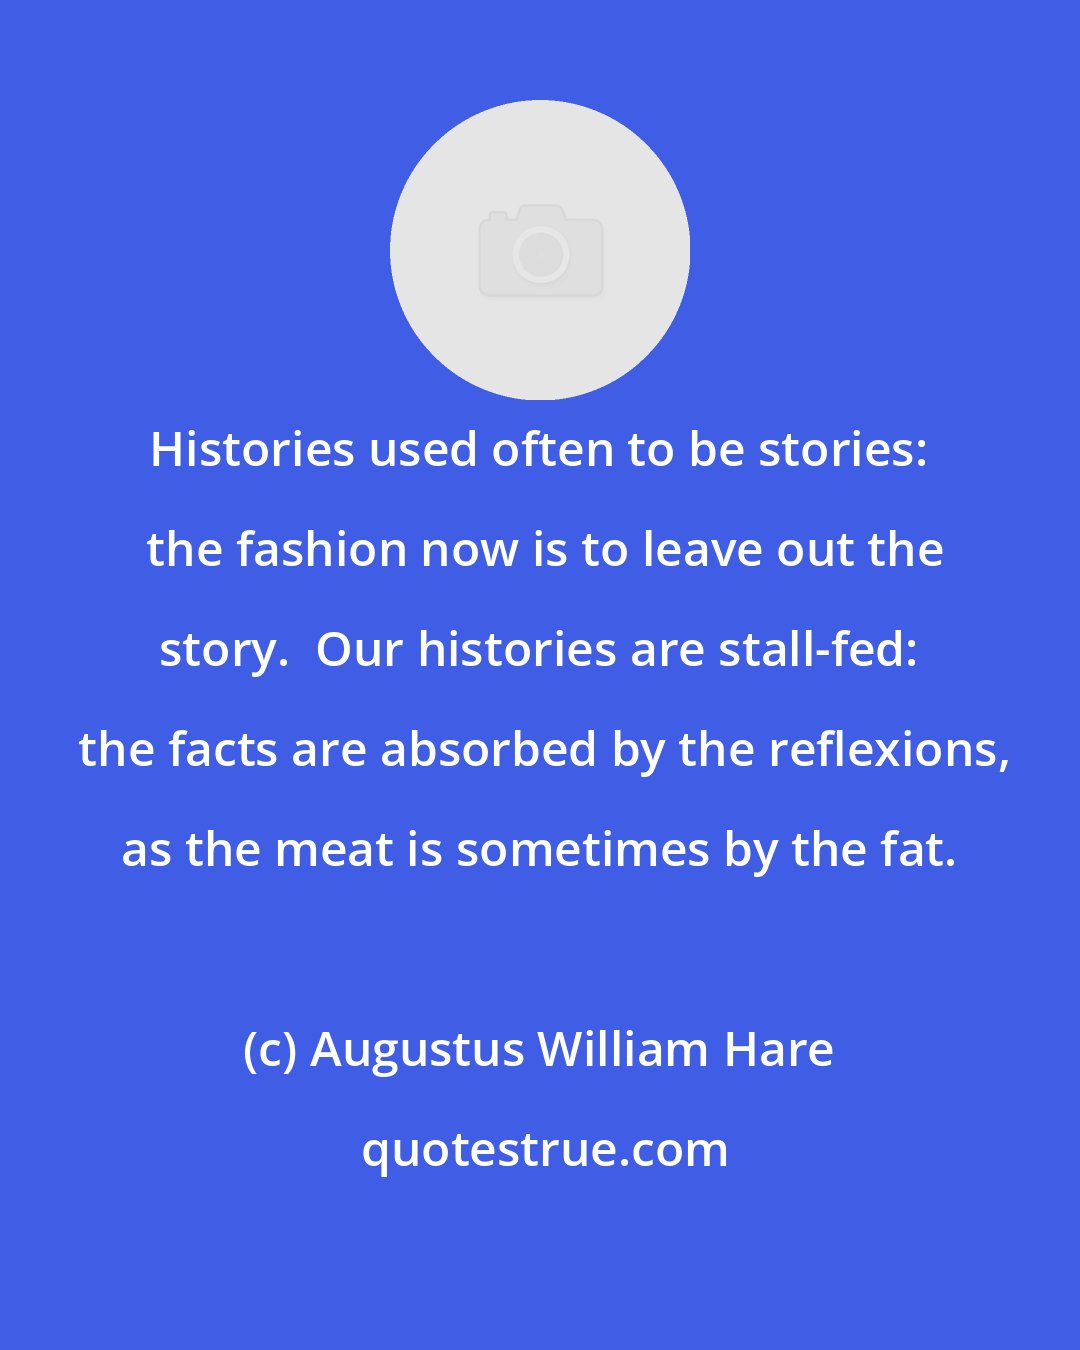 Augustus William Hare: Histories used often to be stories:  the fashion now is to leave out the story.  Our histories are stall-fed:  the facts are absorbed by the reflexions, as the meat is sometimes by the fat.